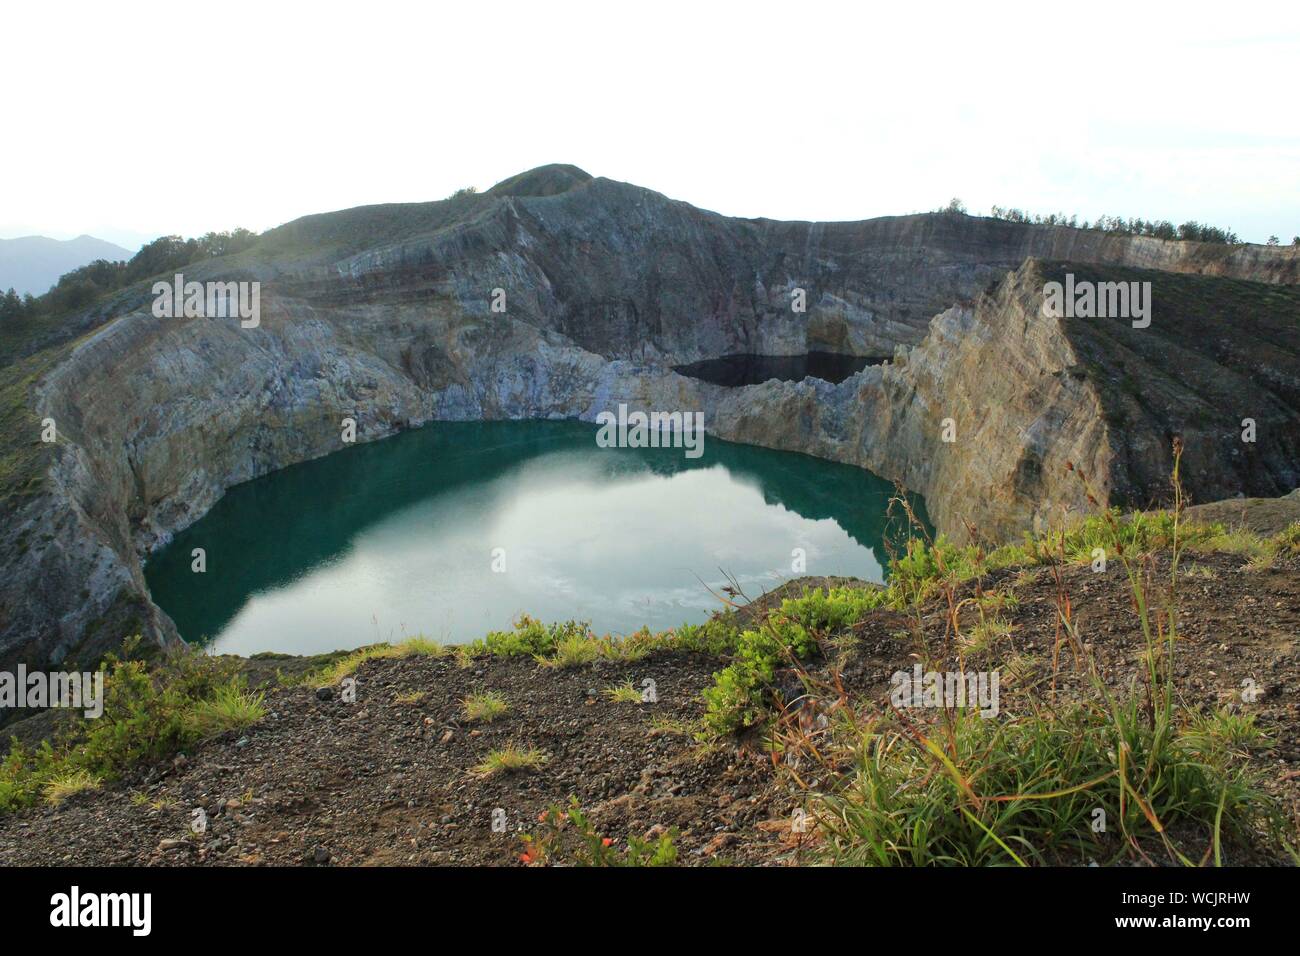 Volcanic Crater Filled With Clear Turquoise Water Stock Photo